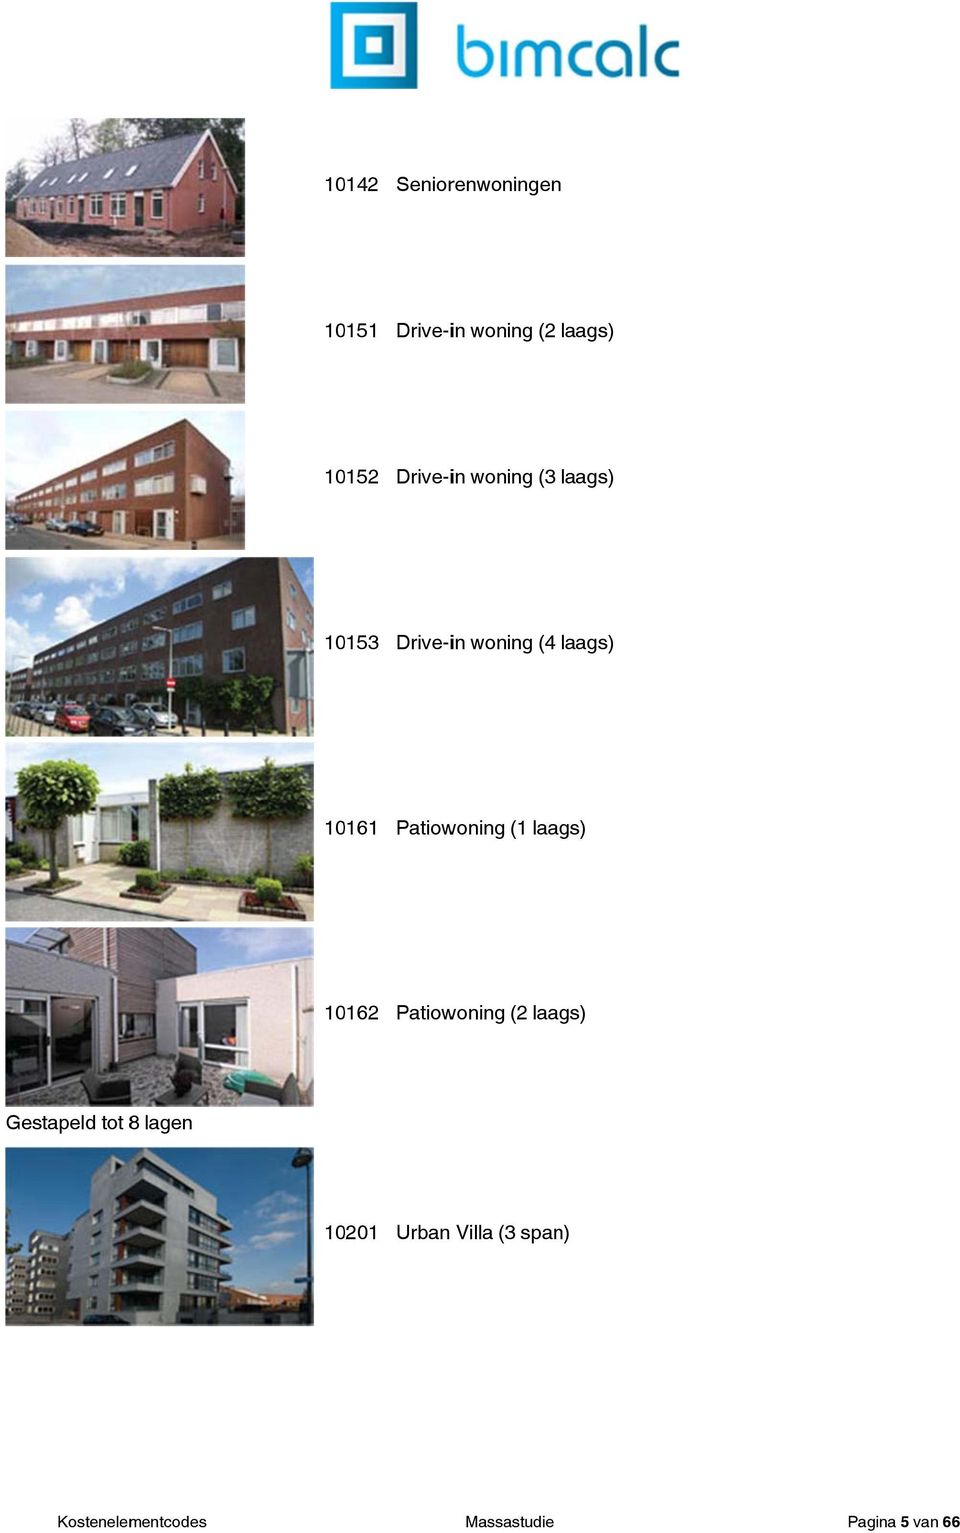 laags) 10161 Patiowoning (1 laags) 10162 Patiowoning (2